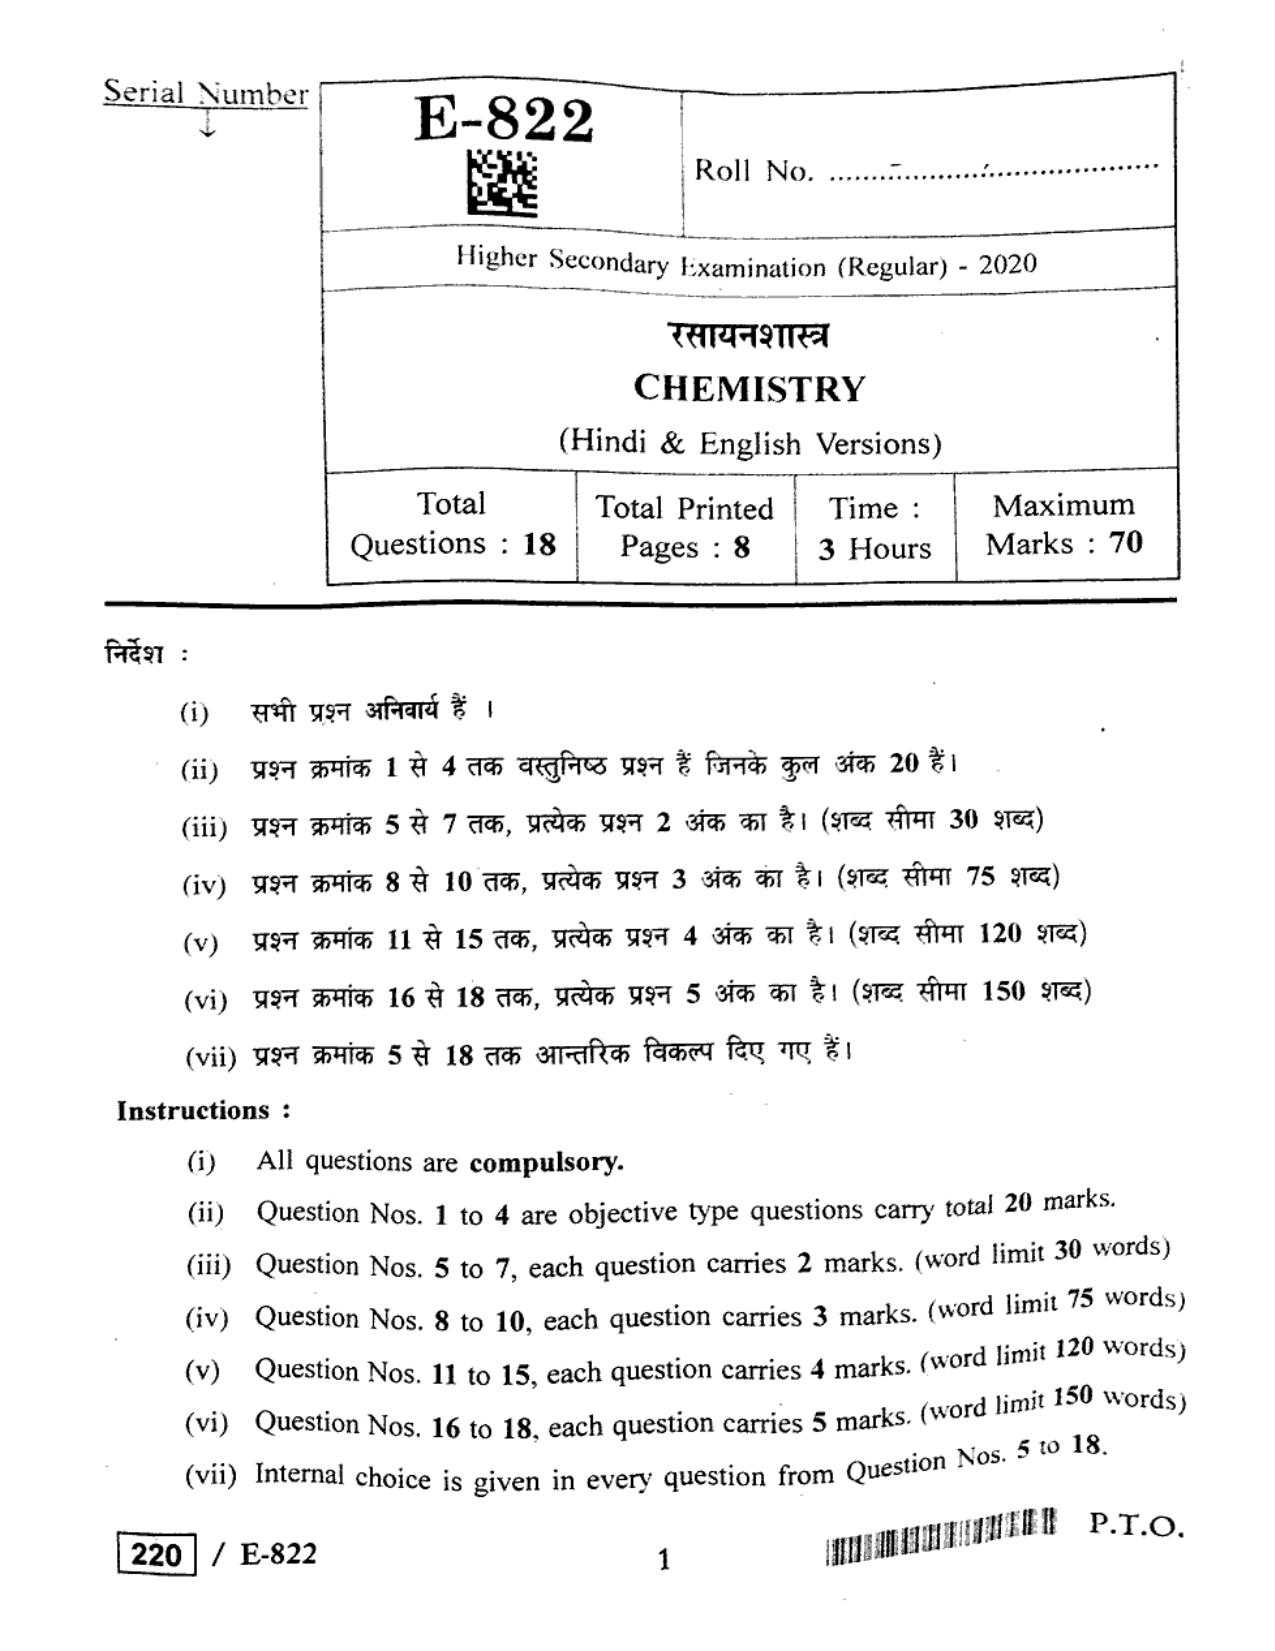 MP Board Class 12 Chemistry 2020 Question Paper - Page 1